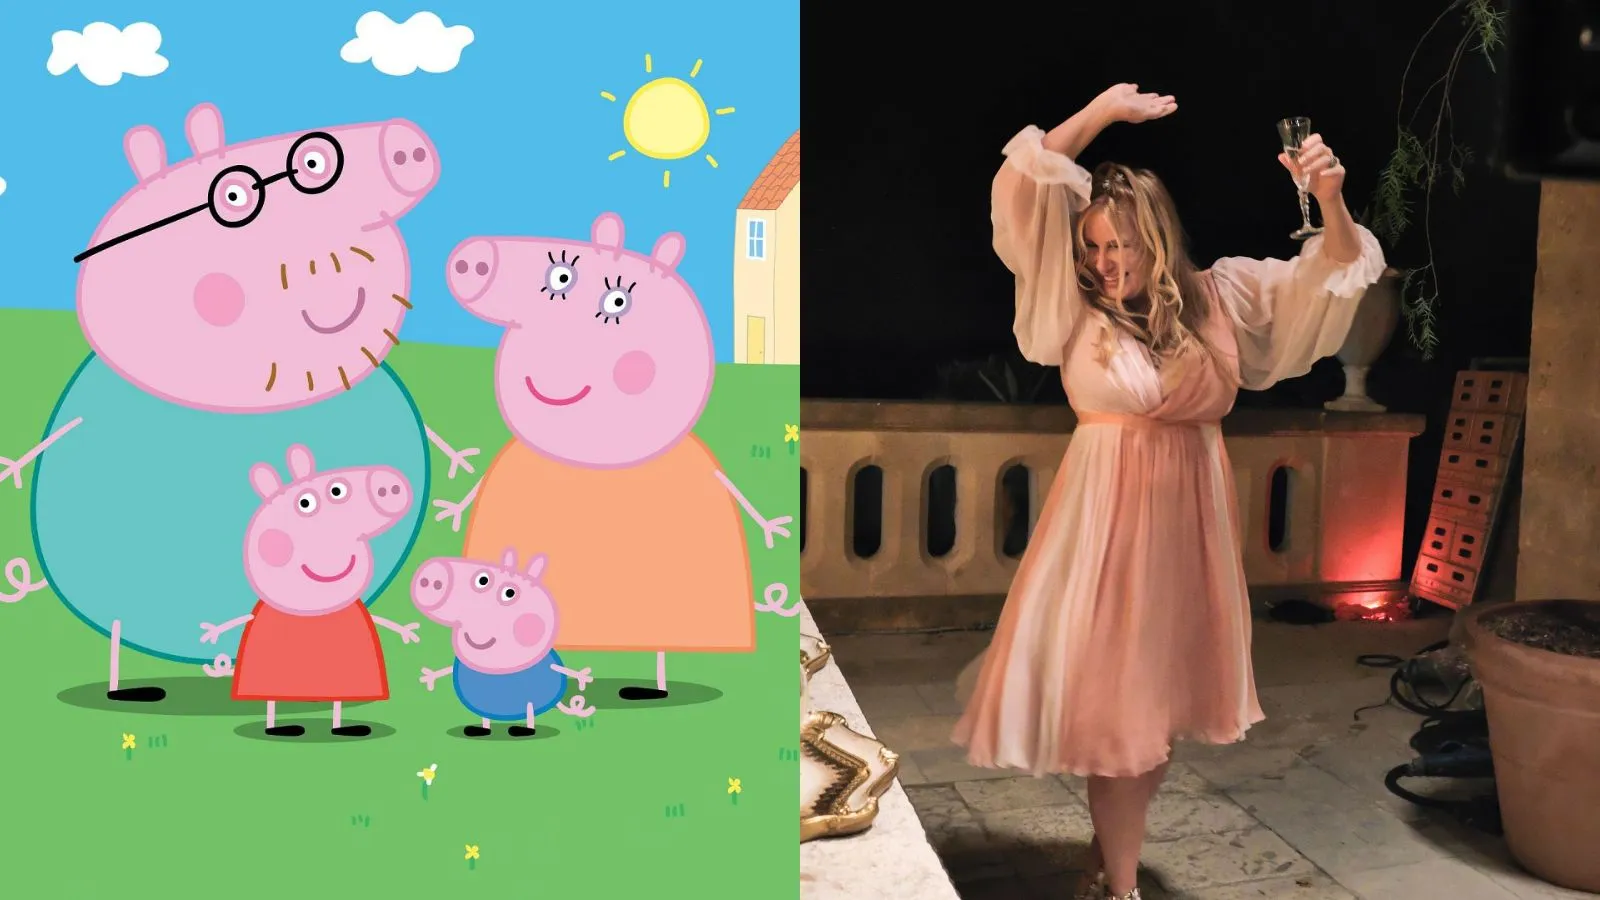 ‘Peppa Pig’ is now canon in ‘The White Lotus’ universe, thanks to a brutal Jennifer Coolidge sledge